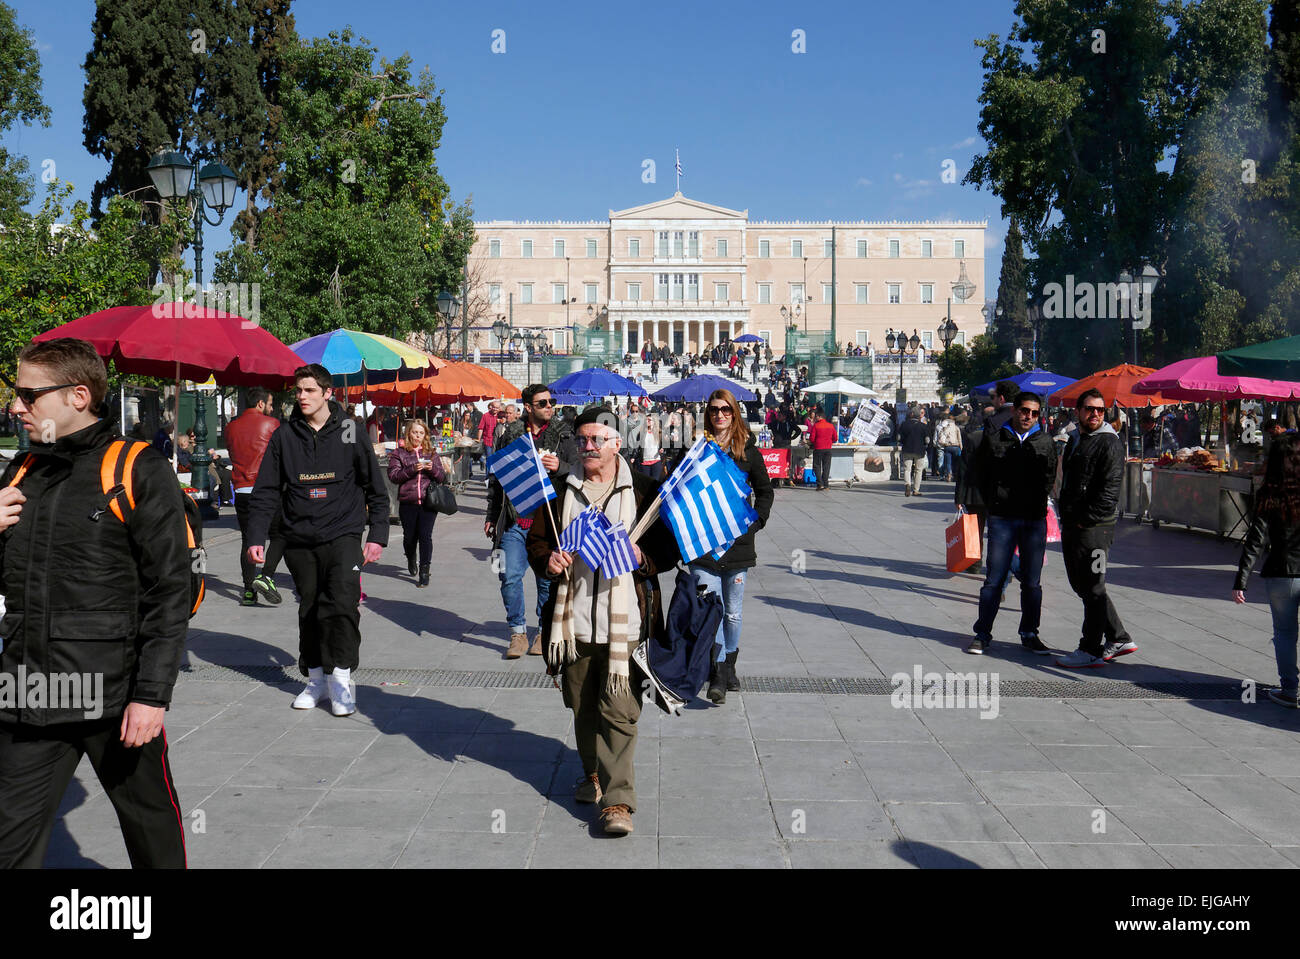 greece athens sitagma square a man selling greek flags Stock Photo